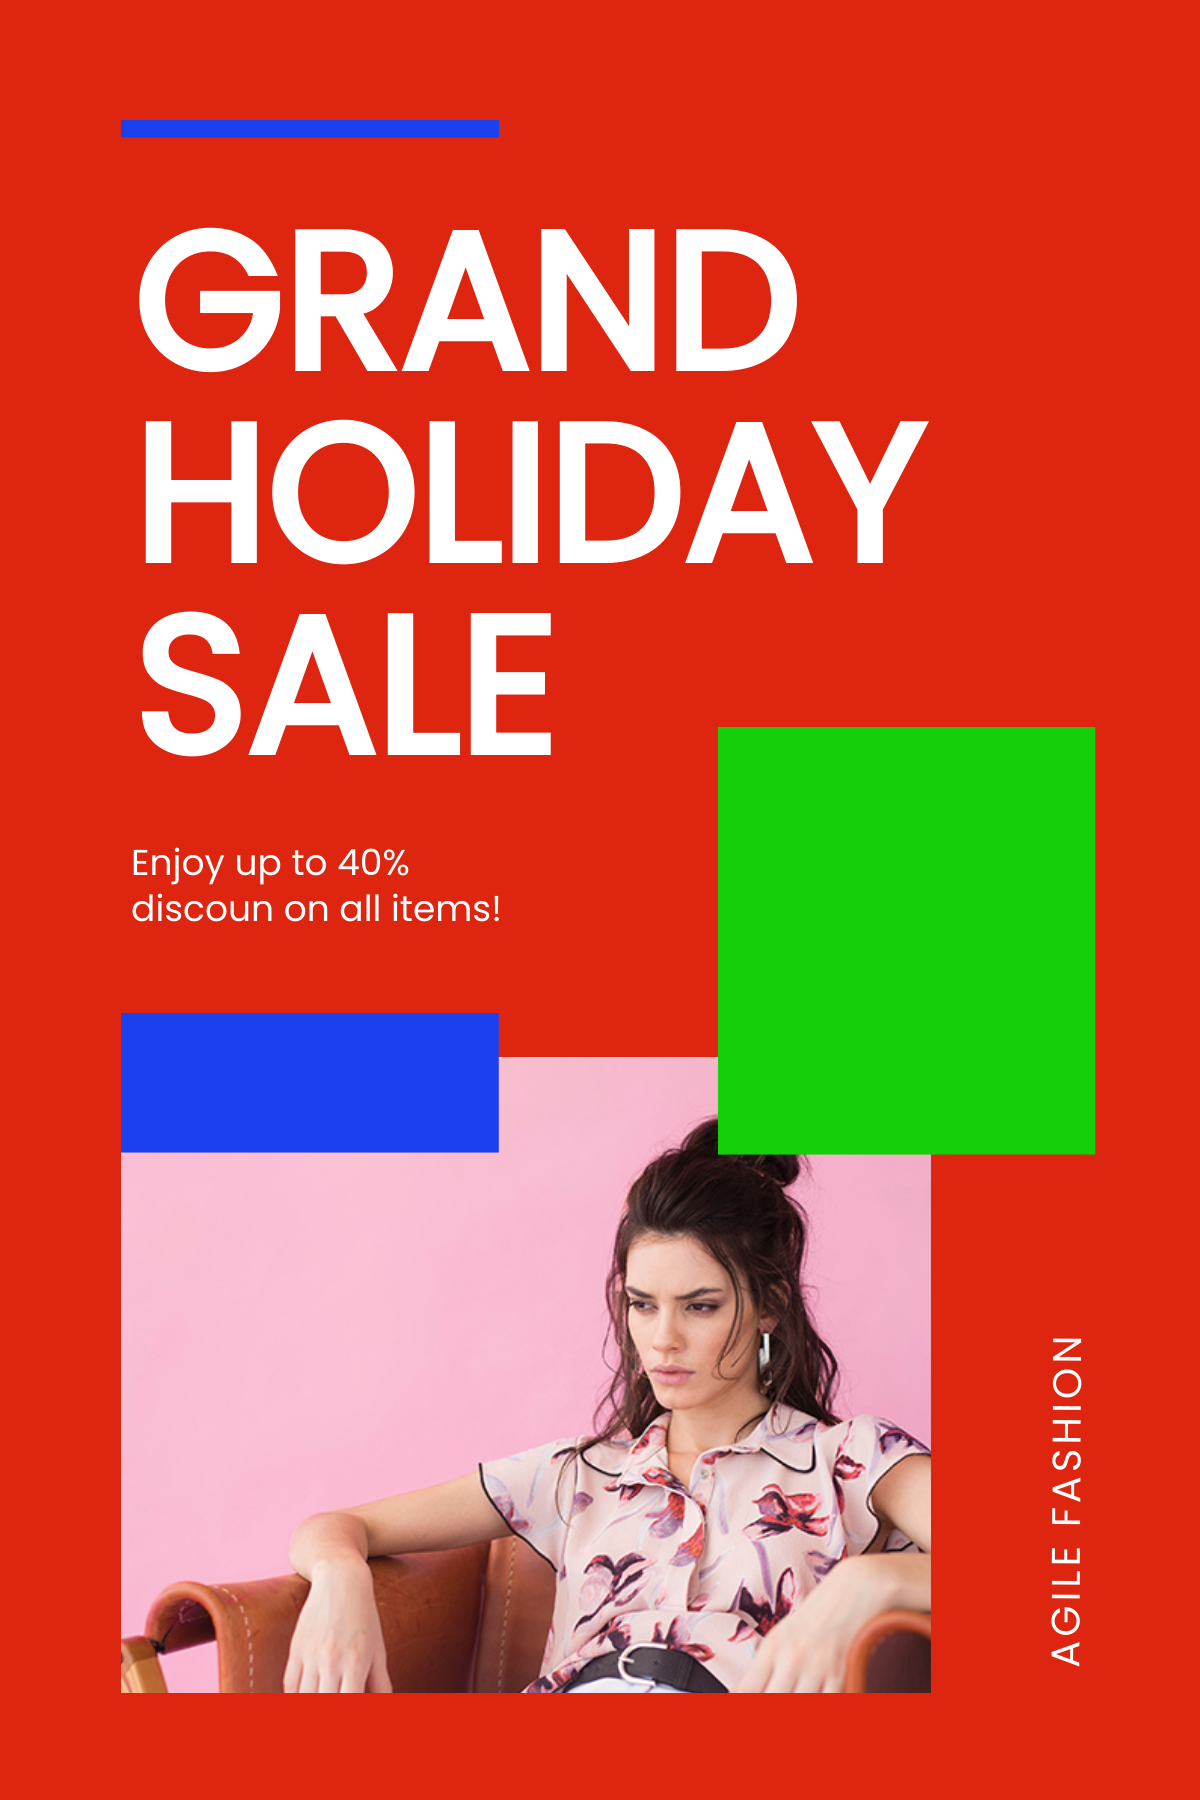 Free Holiday Offer Sale Pinterest Pin Template